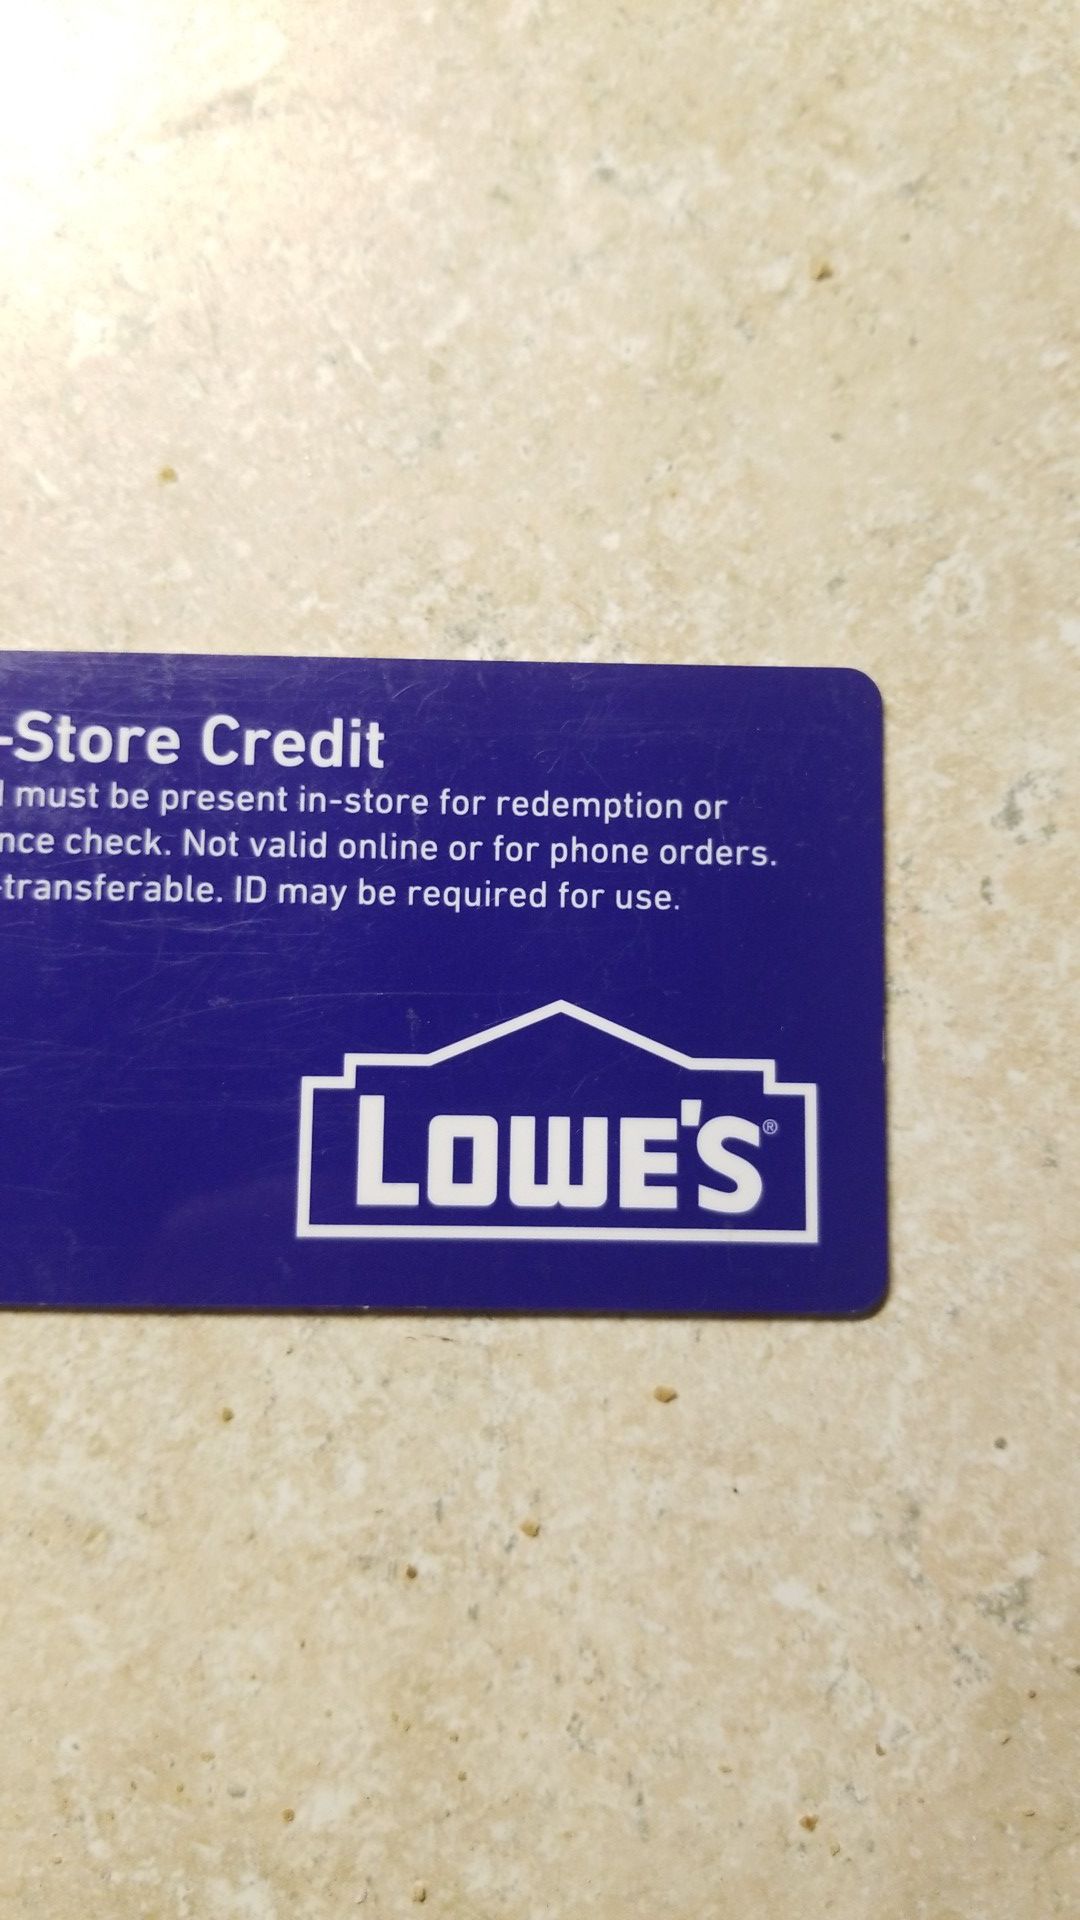 Lowe's in store credit card with $271 balance